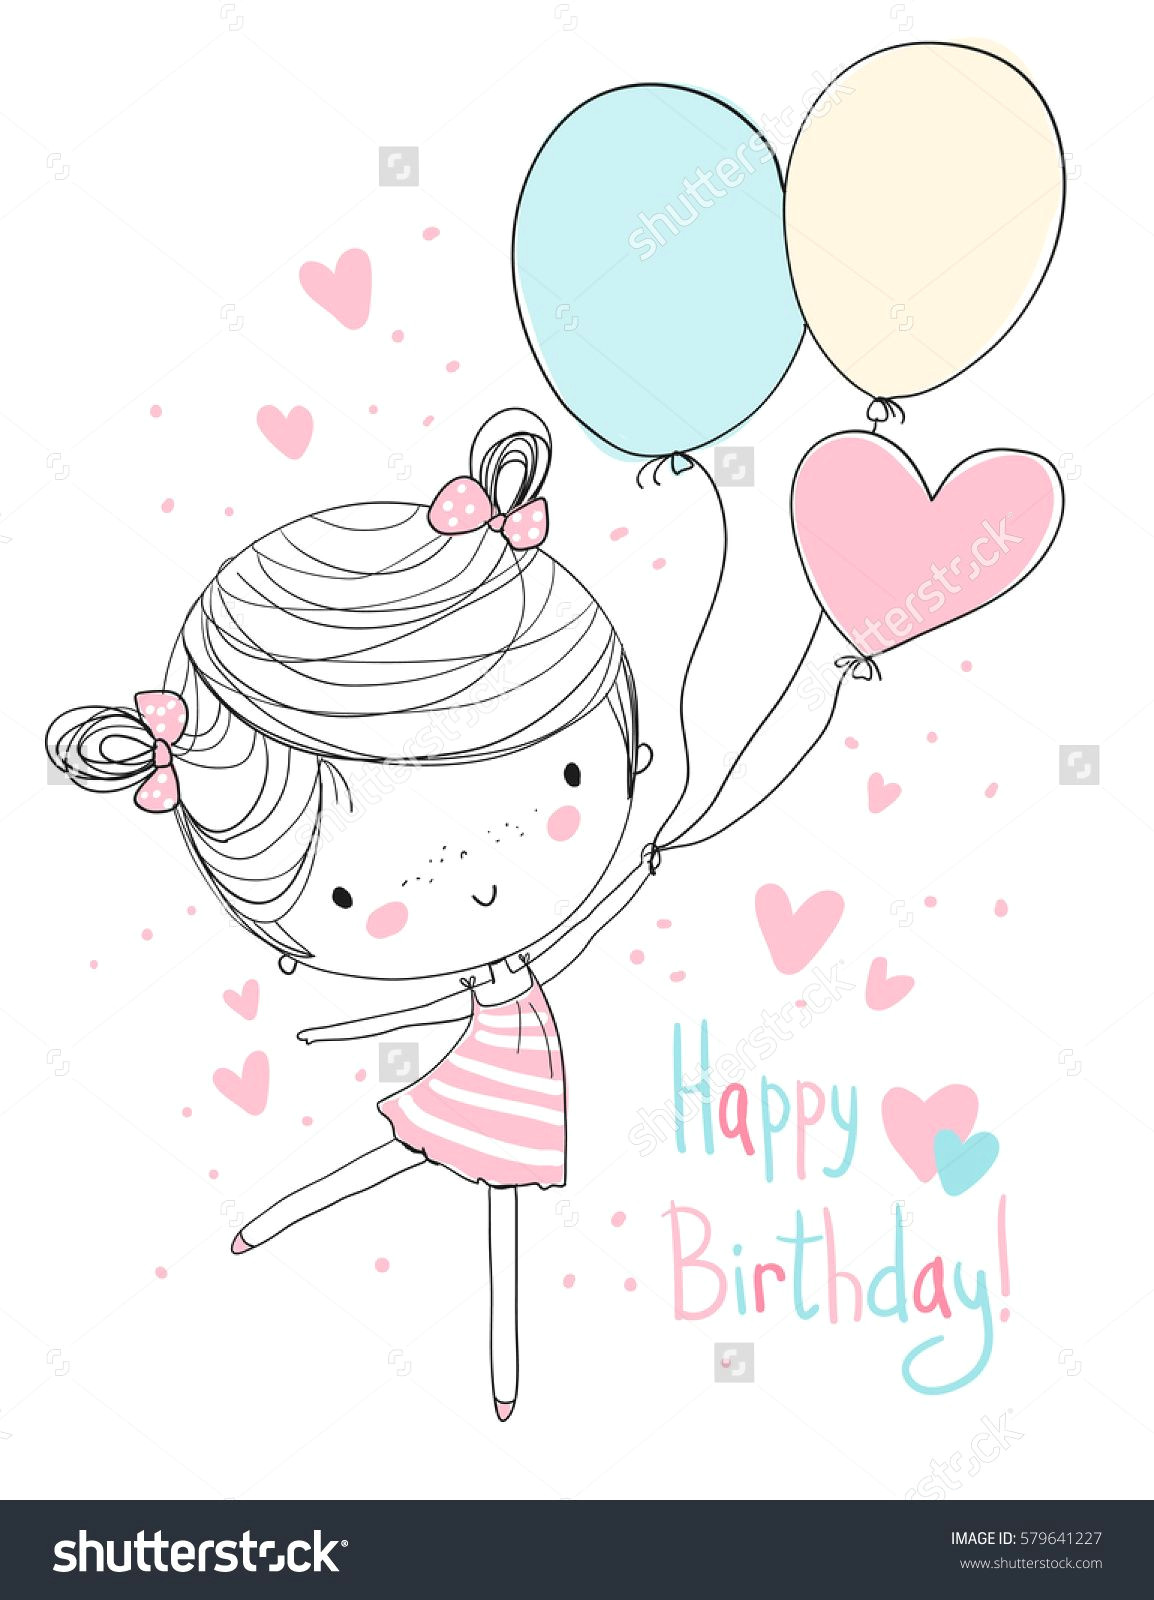 Drawing Of A Girl Holding Balloons Girl Holding Balloons Happy Birthday Couple Things Pinterest